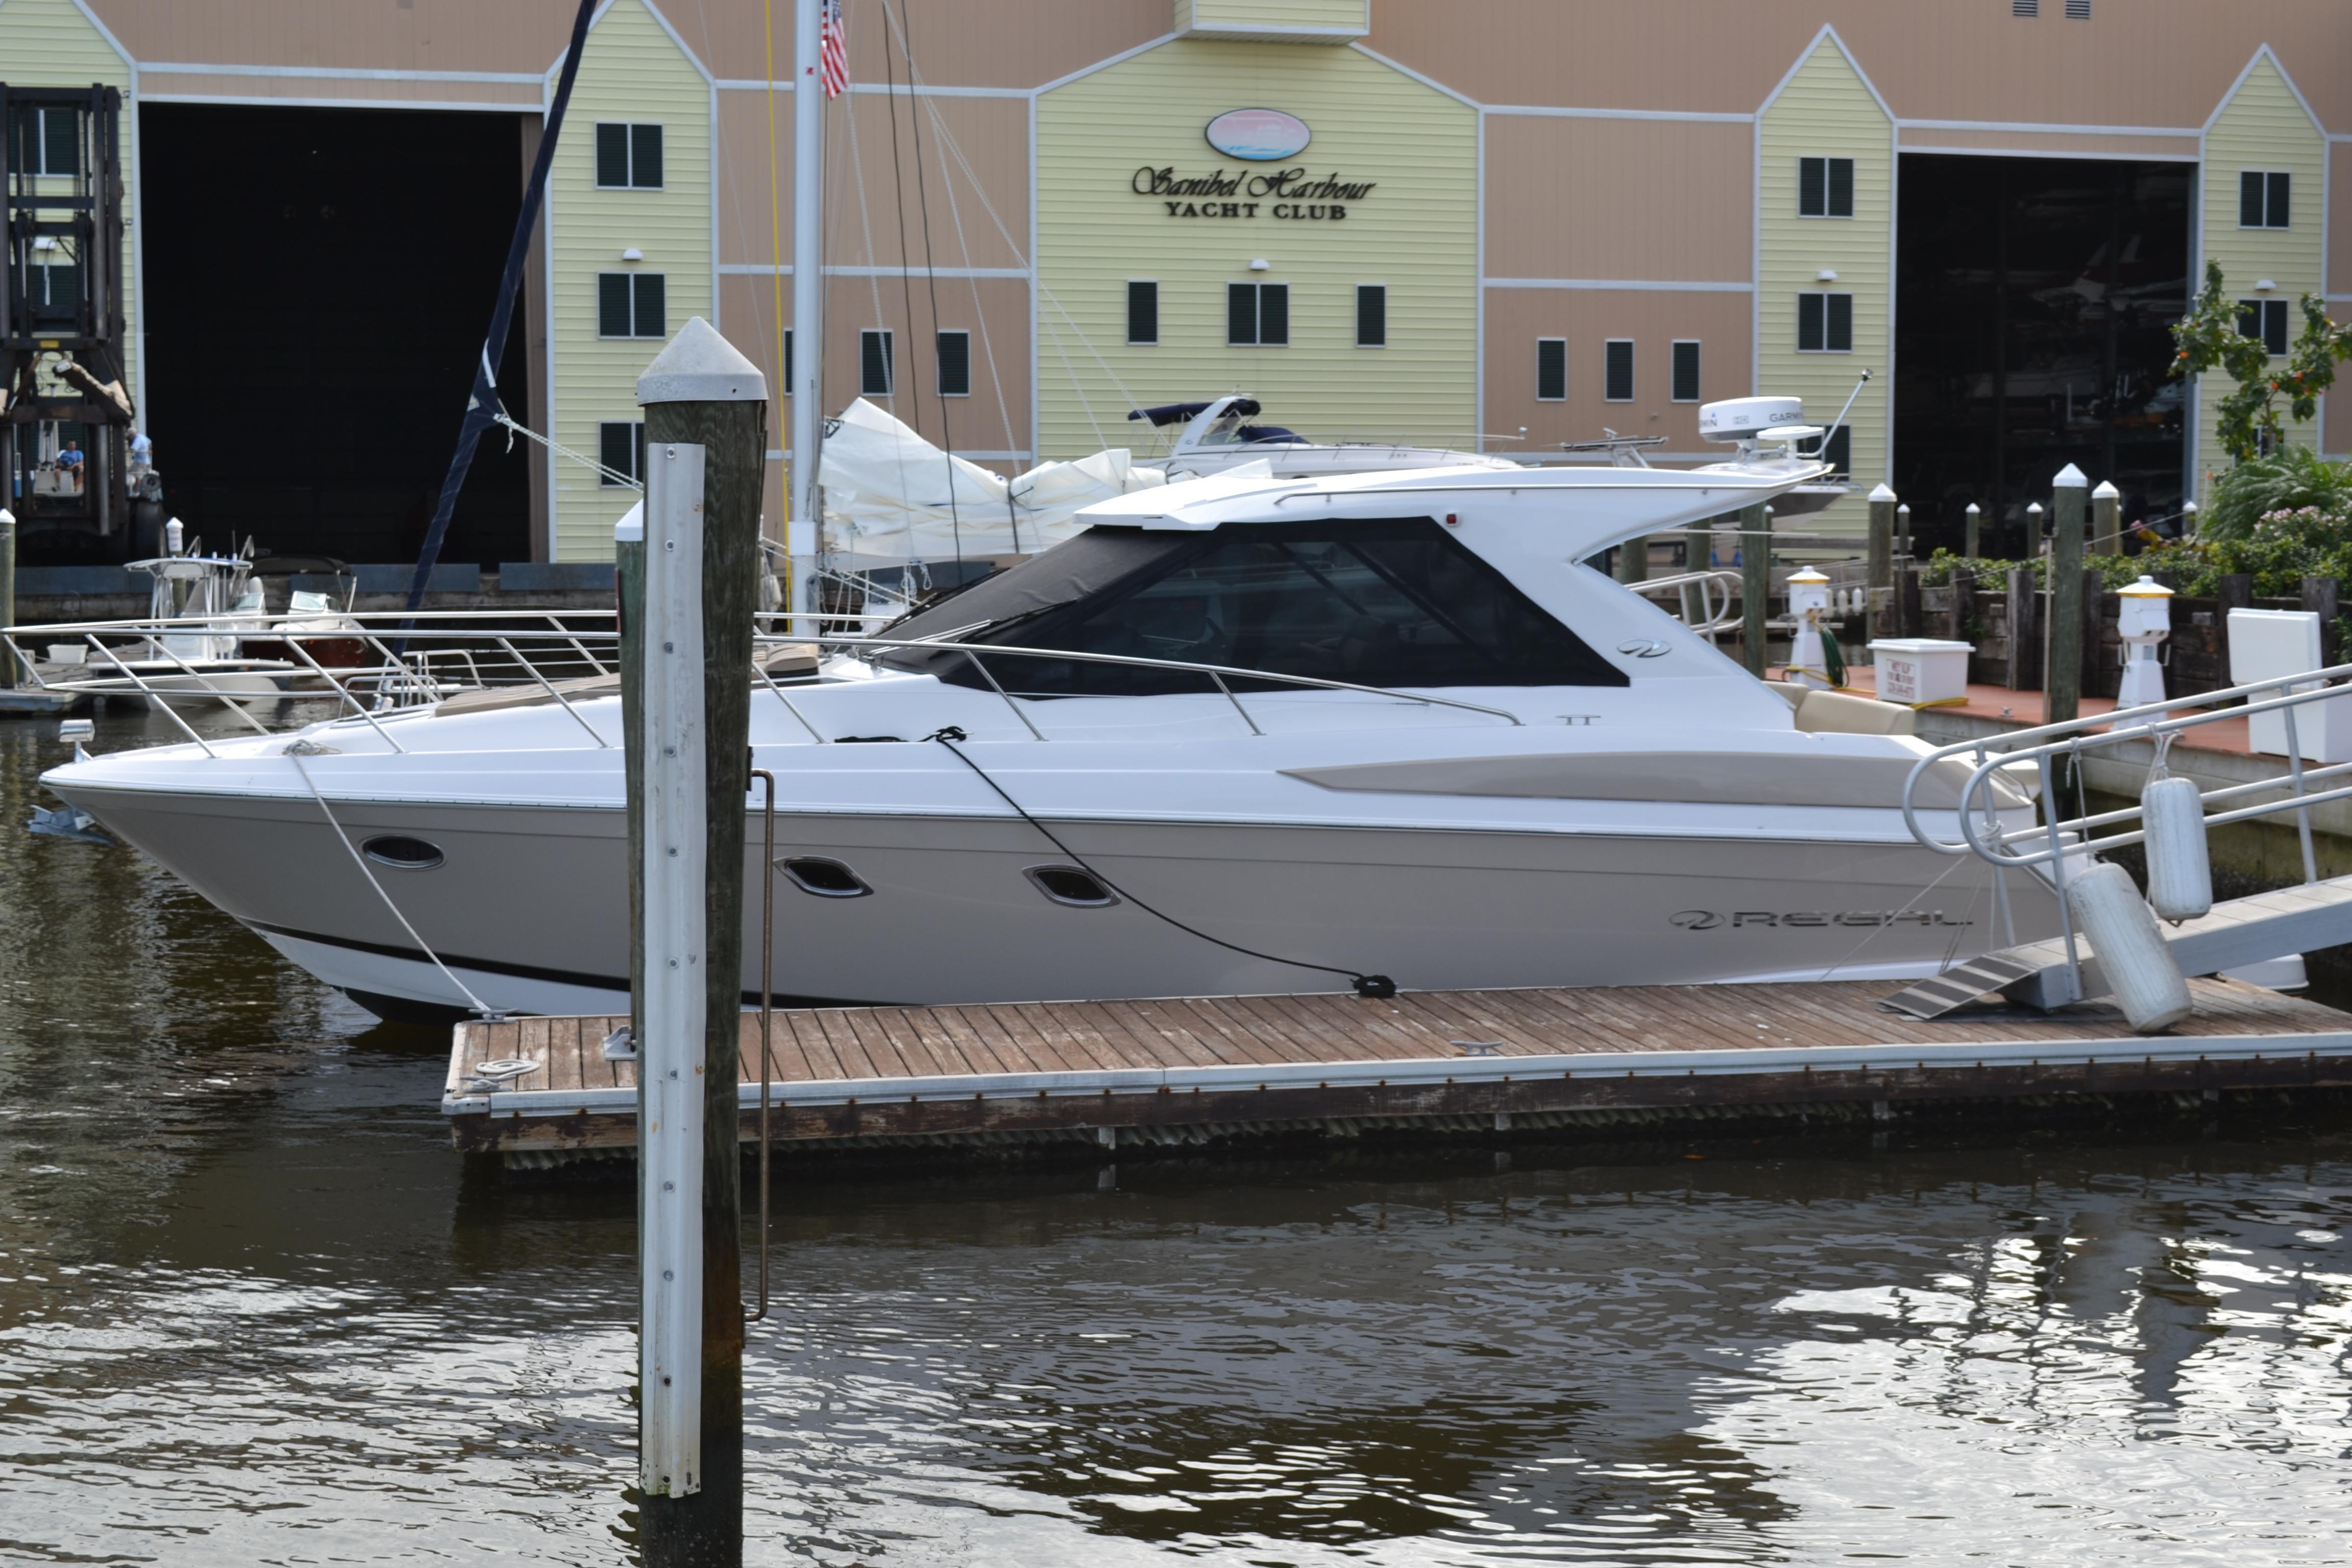 Regal 42 Sport Coupe, Fort Myers